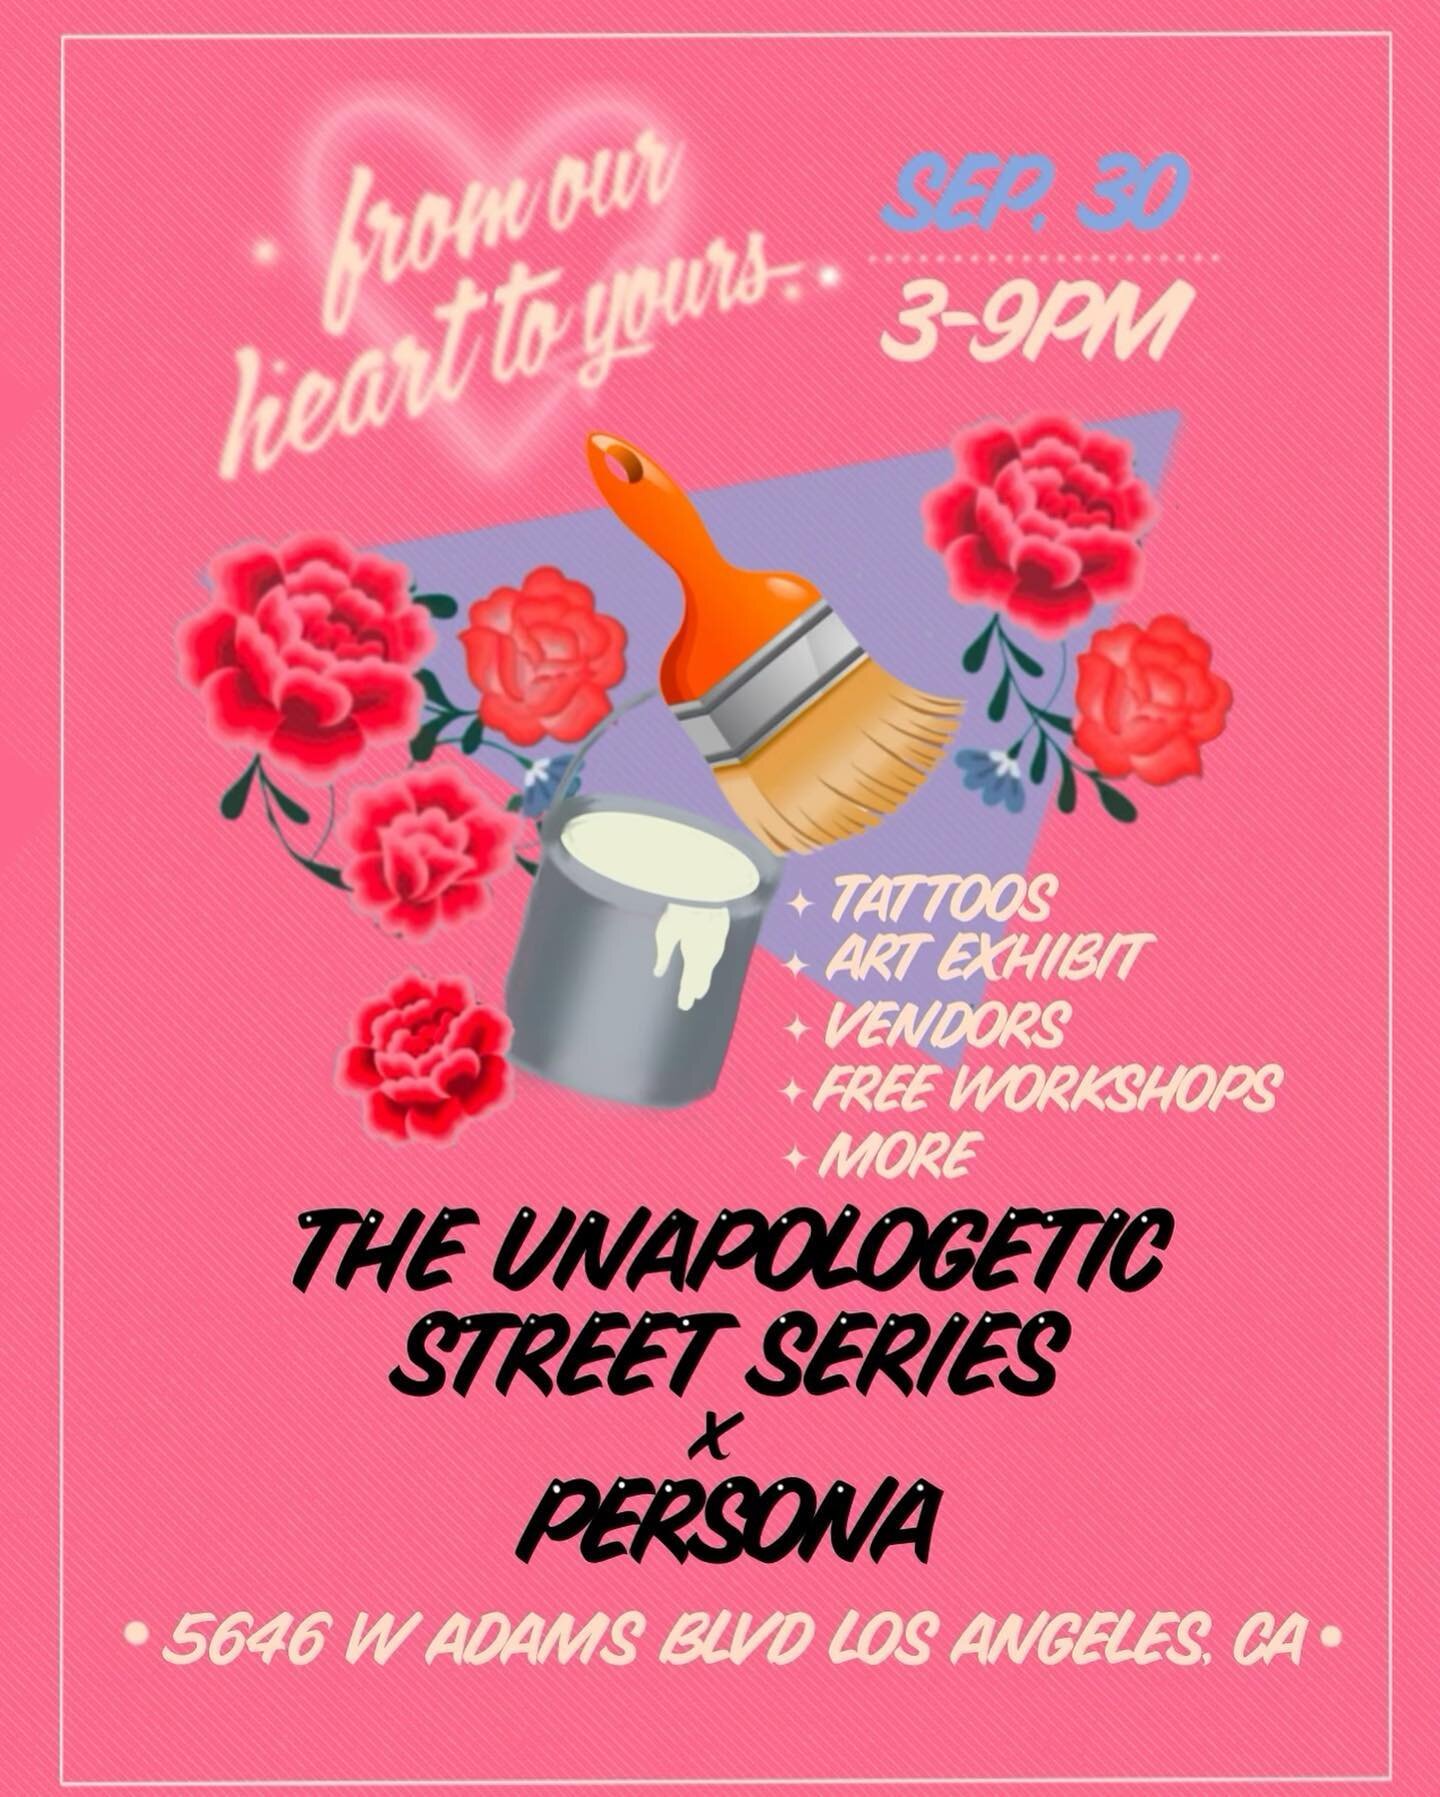 💖 I am incredibly excited to be part of this event by @theunapologeticstreetseries and @persona.theshop 😍! I will be dropping the flash for this event end of the week so keep a 👀. Save the date and come by! So many amazing creatives sharing space 